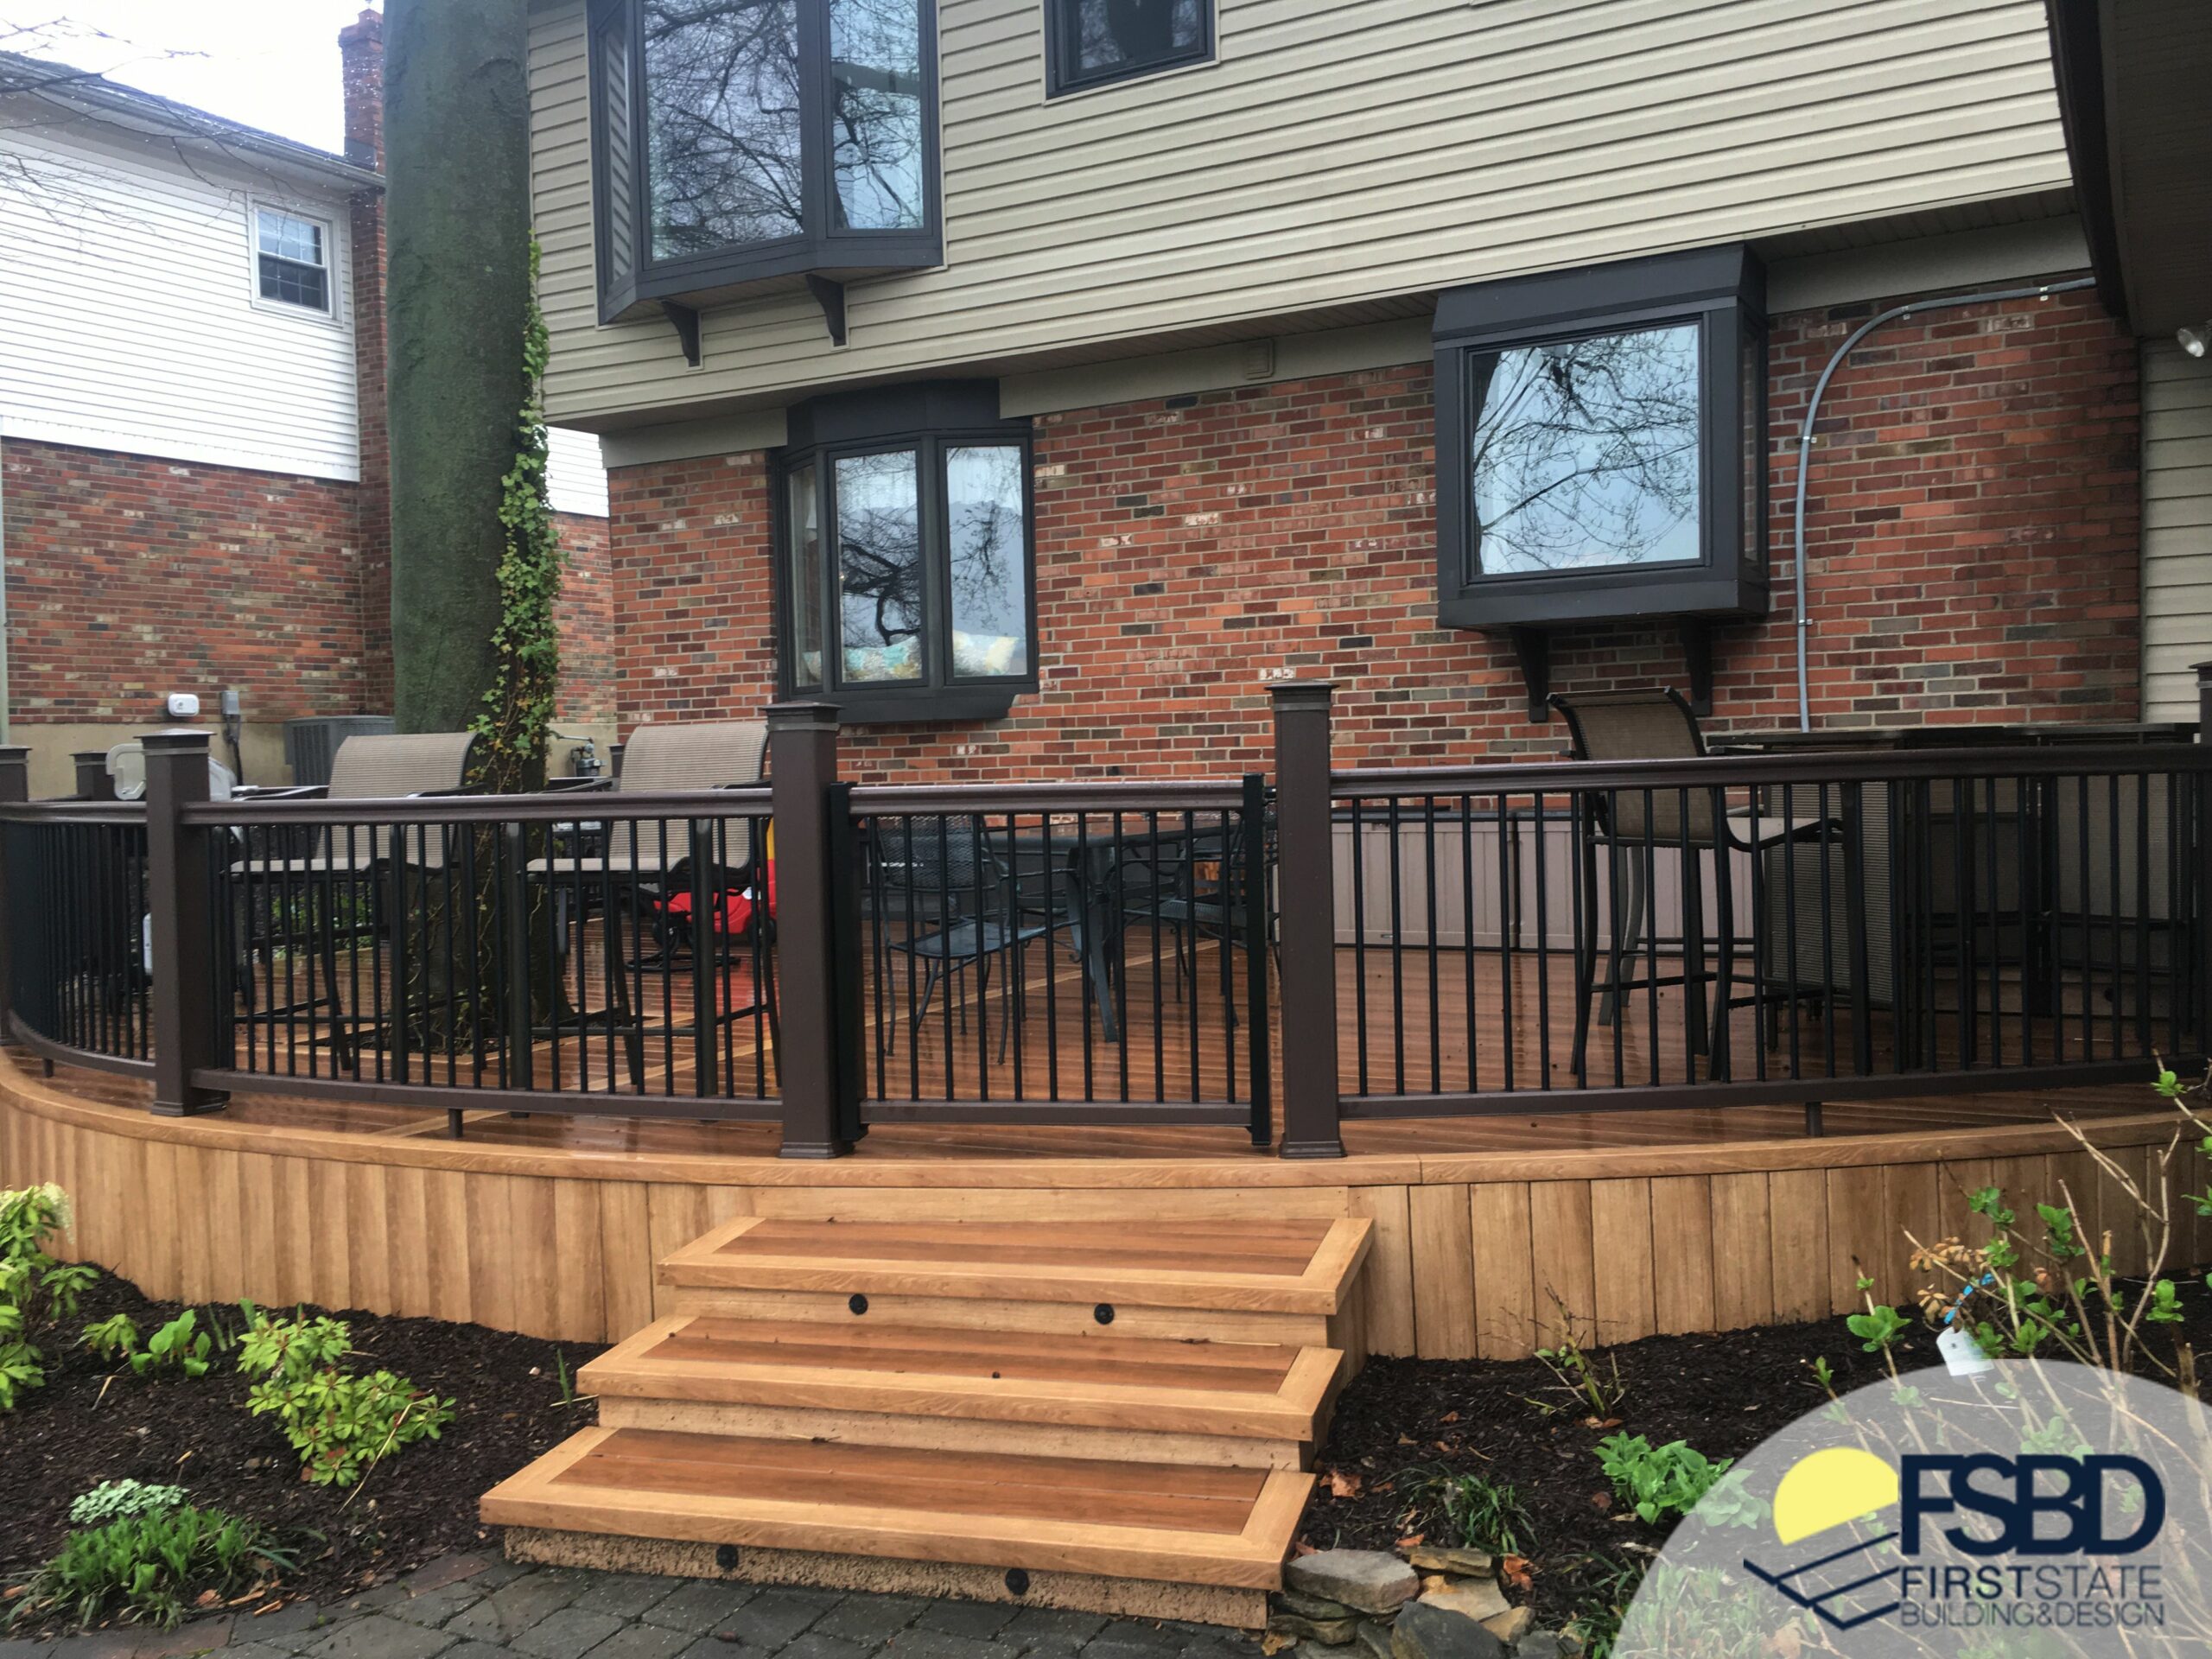 Curved deck with stairs and railing